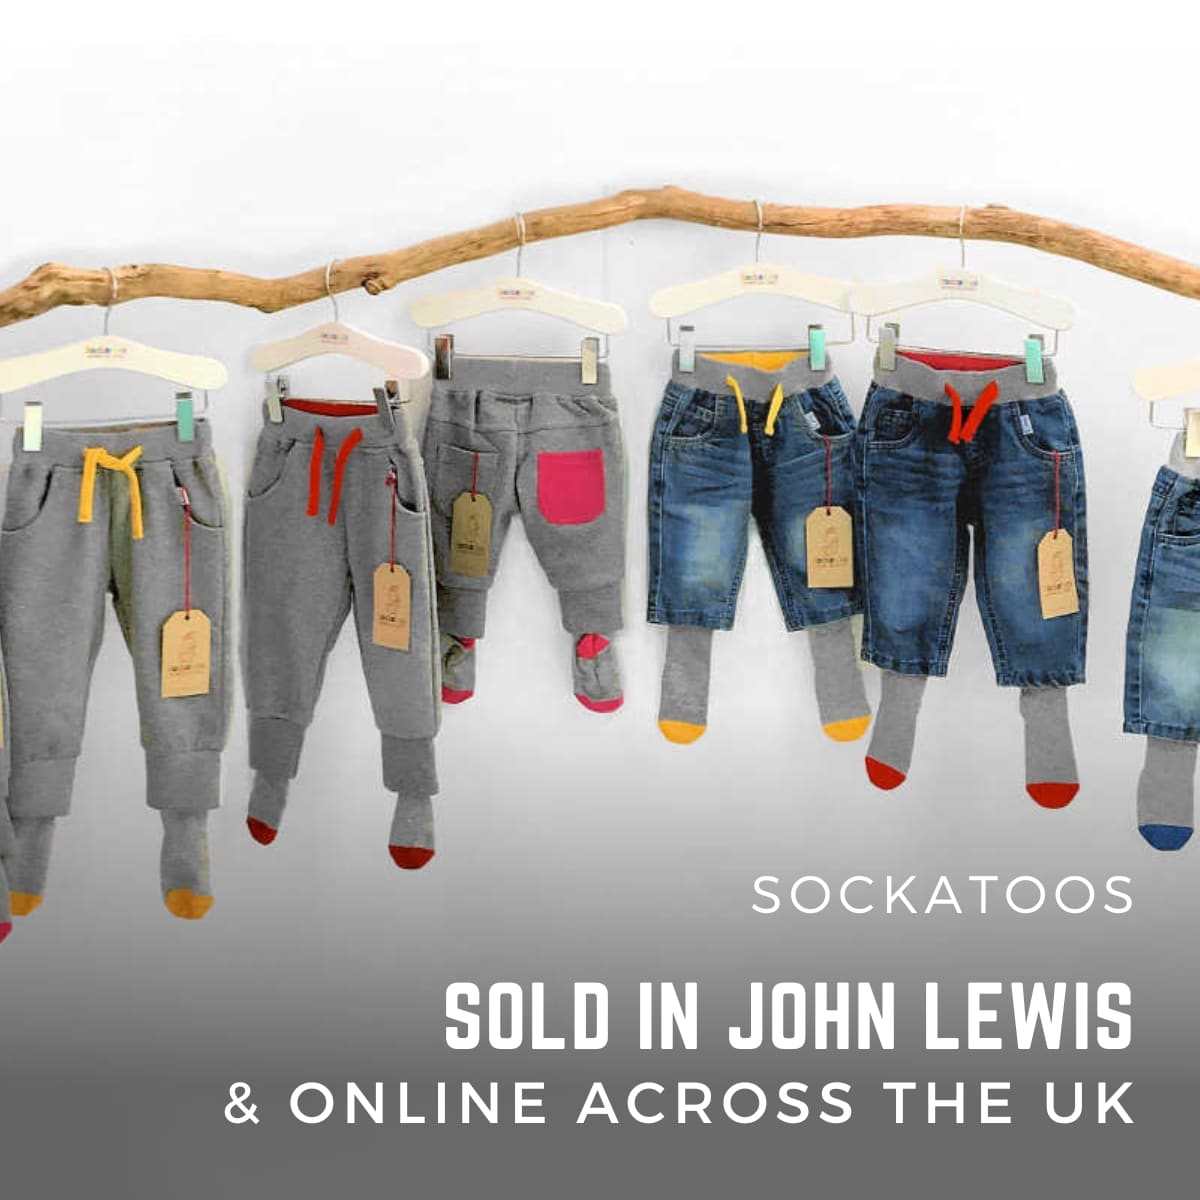 Sockatoos cotton trousers sold in John Lewis